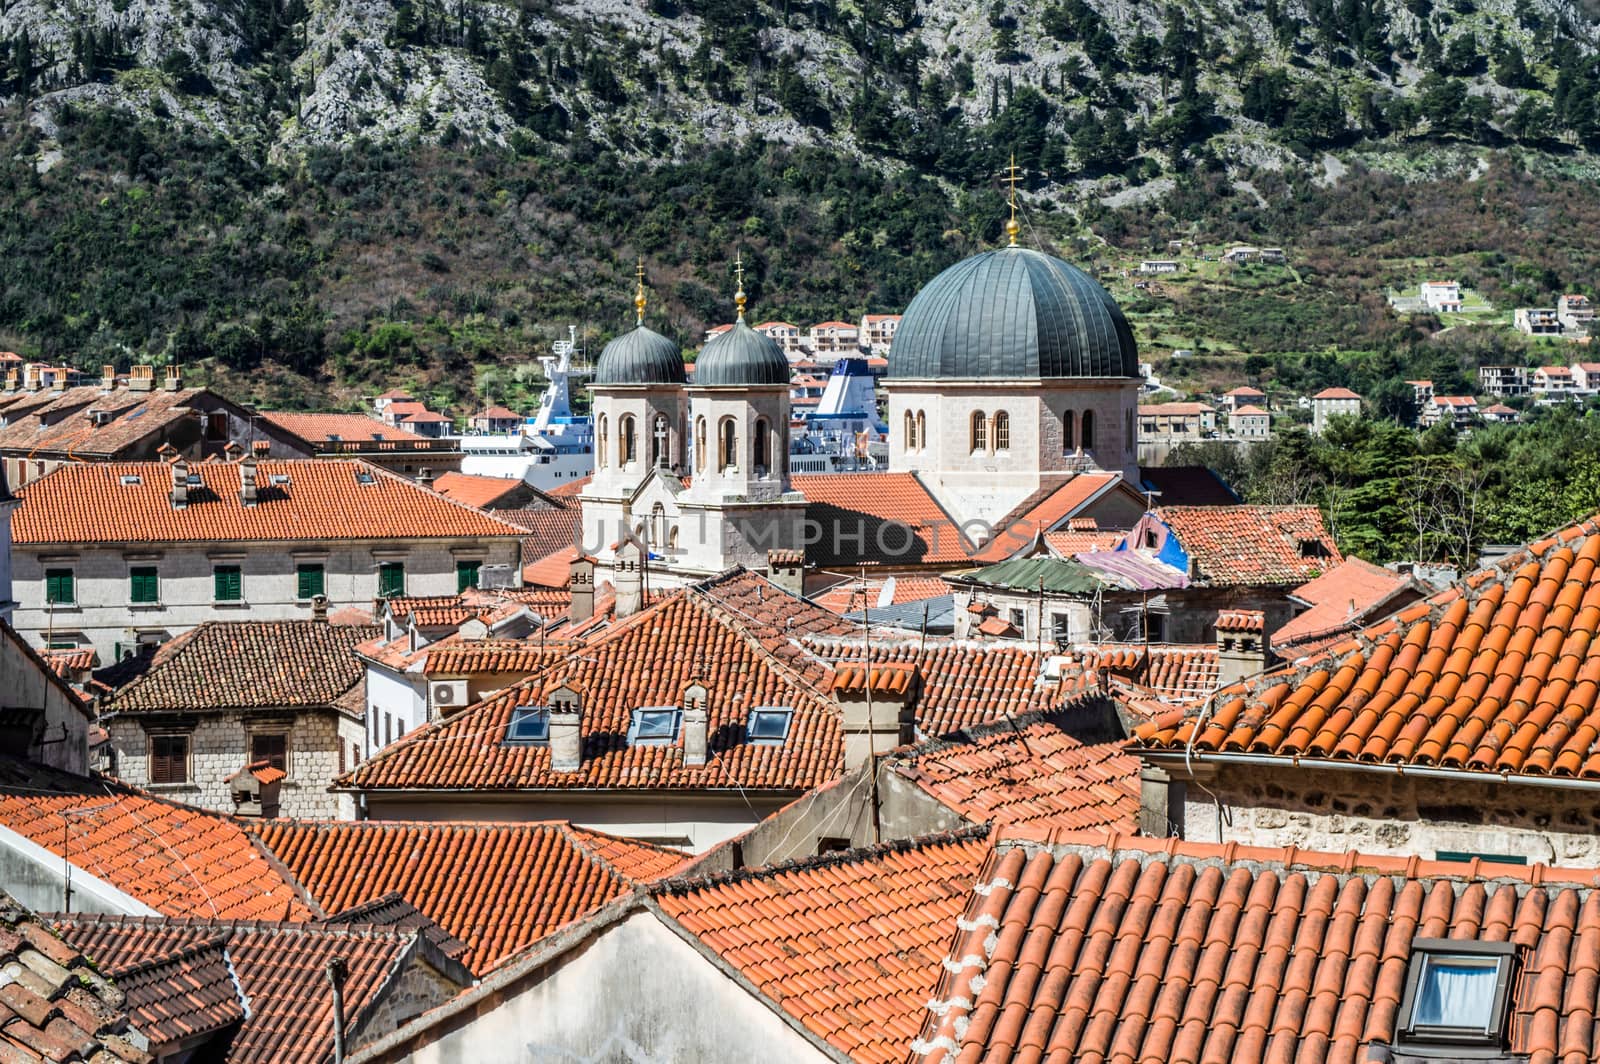 Interloper - Kotor old town roofs and a passenger vessel  by radzonimo